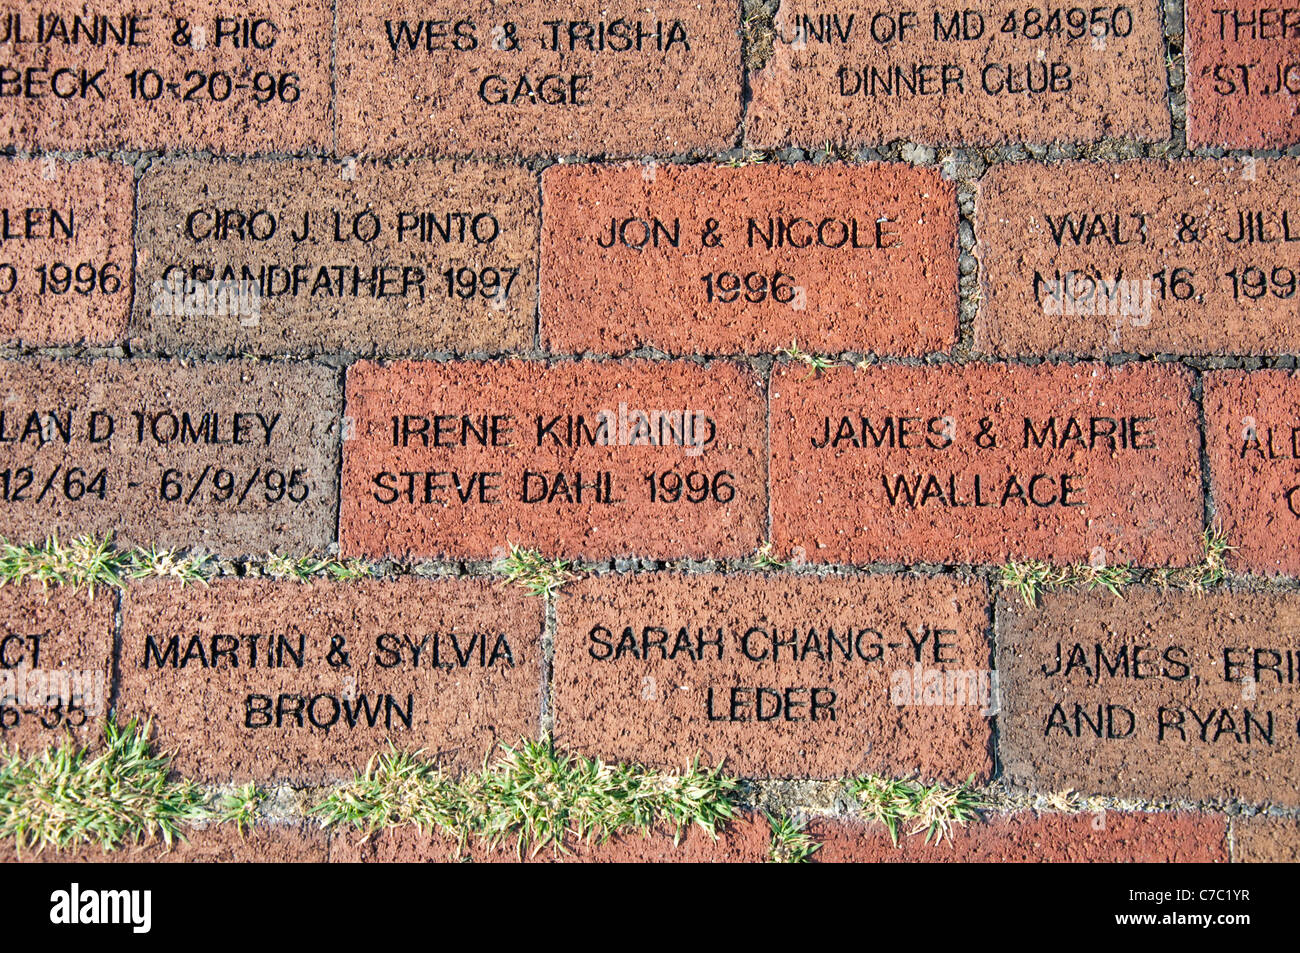 Baltimore Mobile Community Brick Factory and Monument